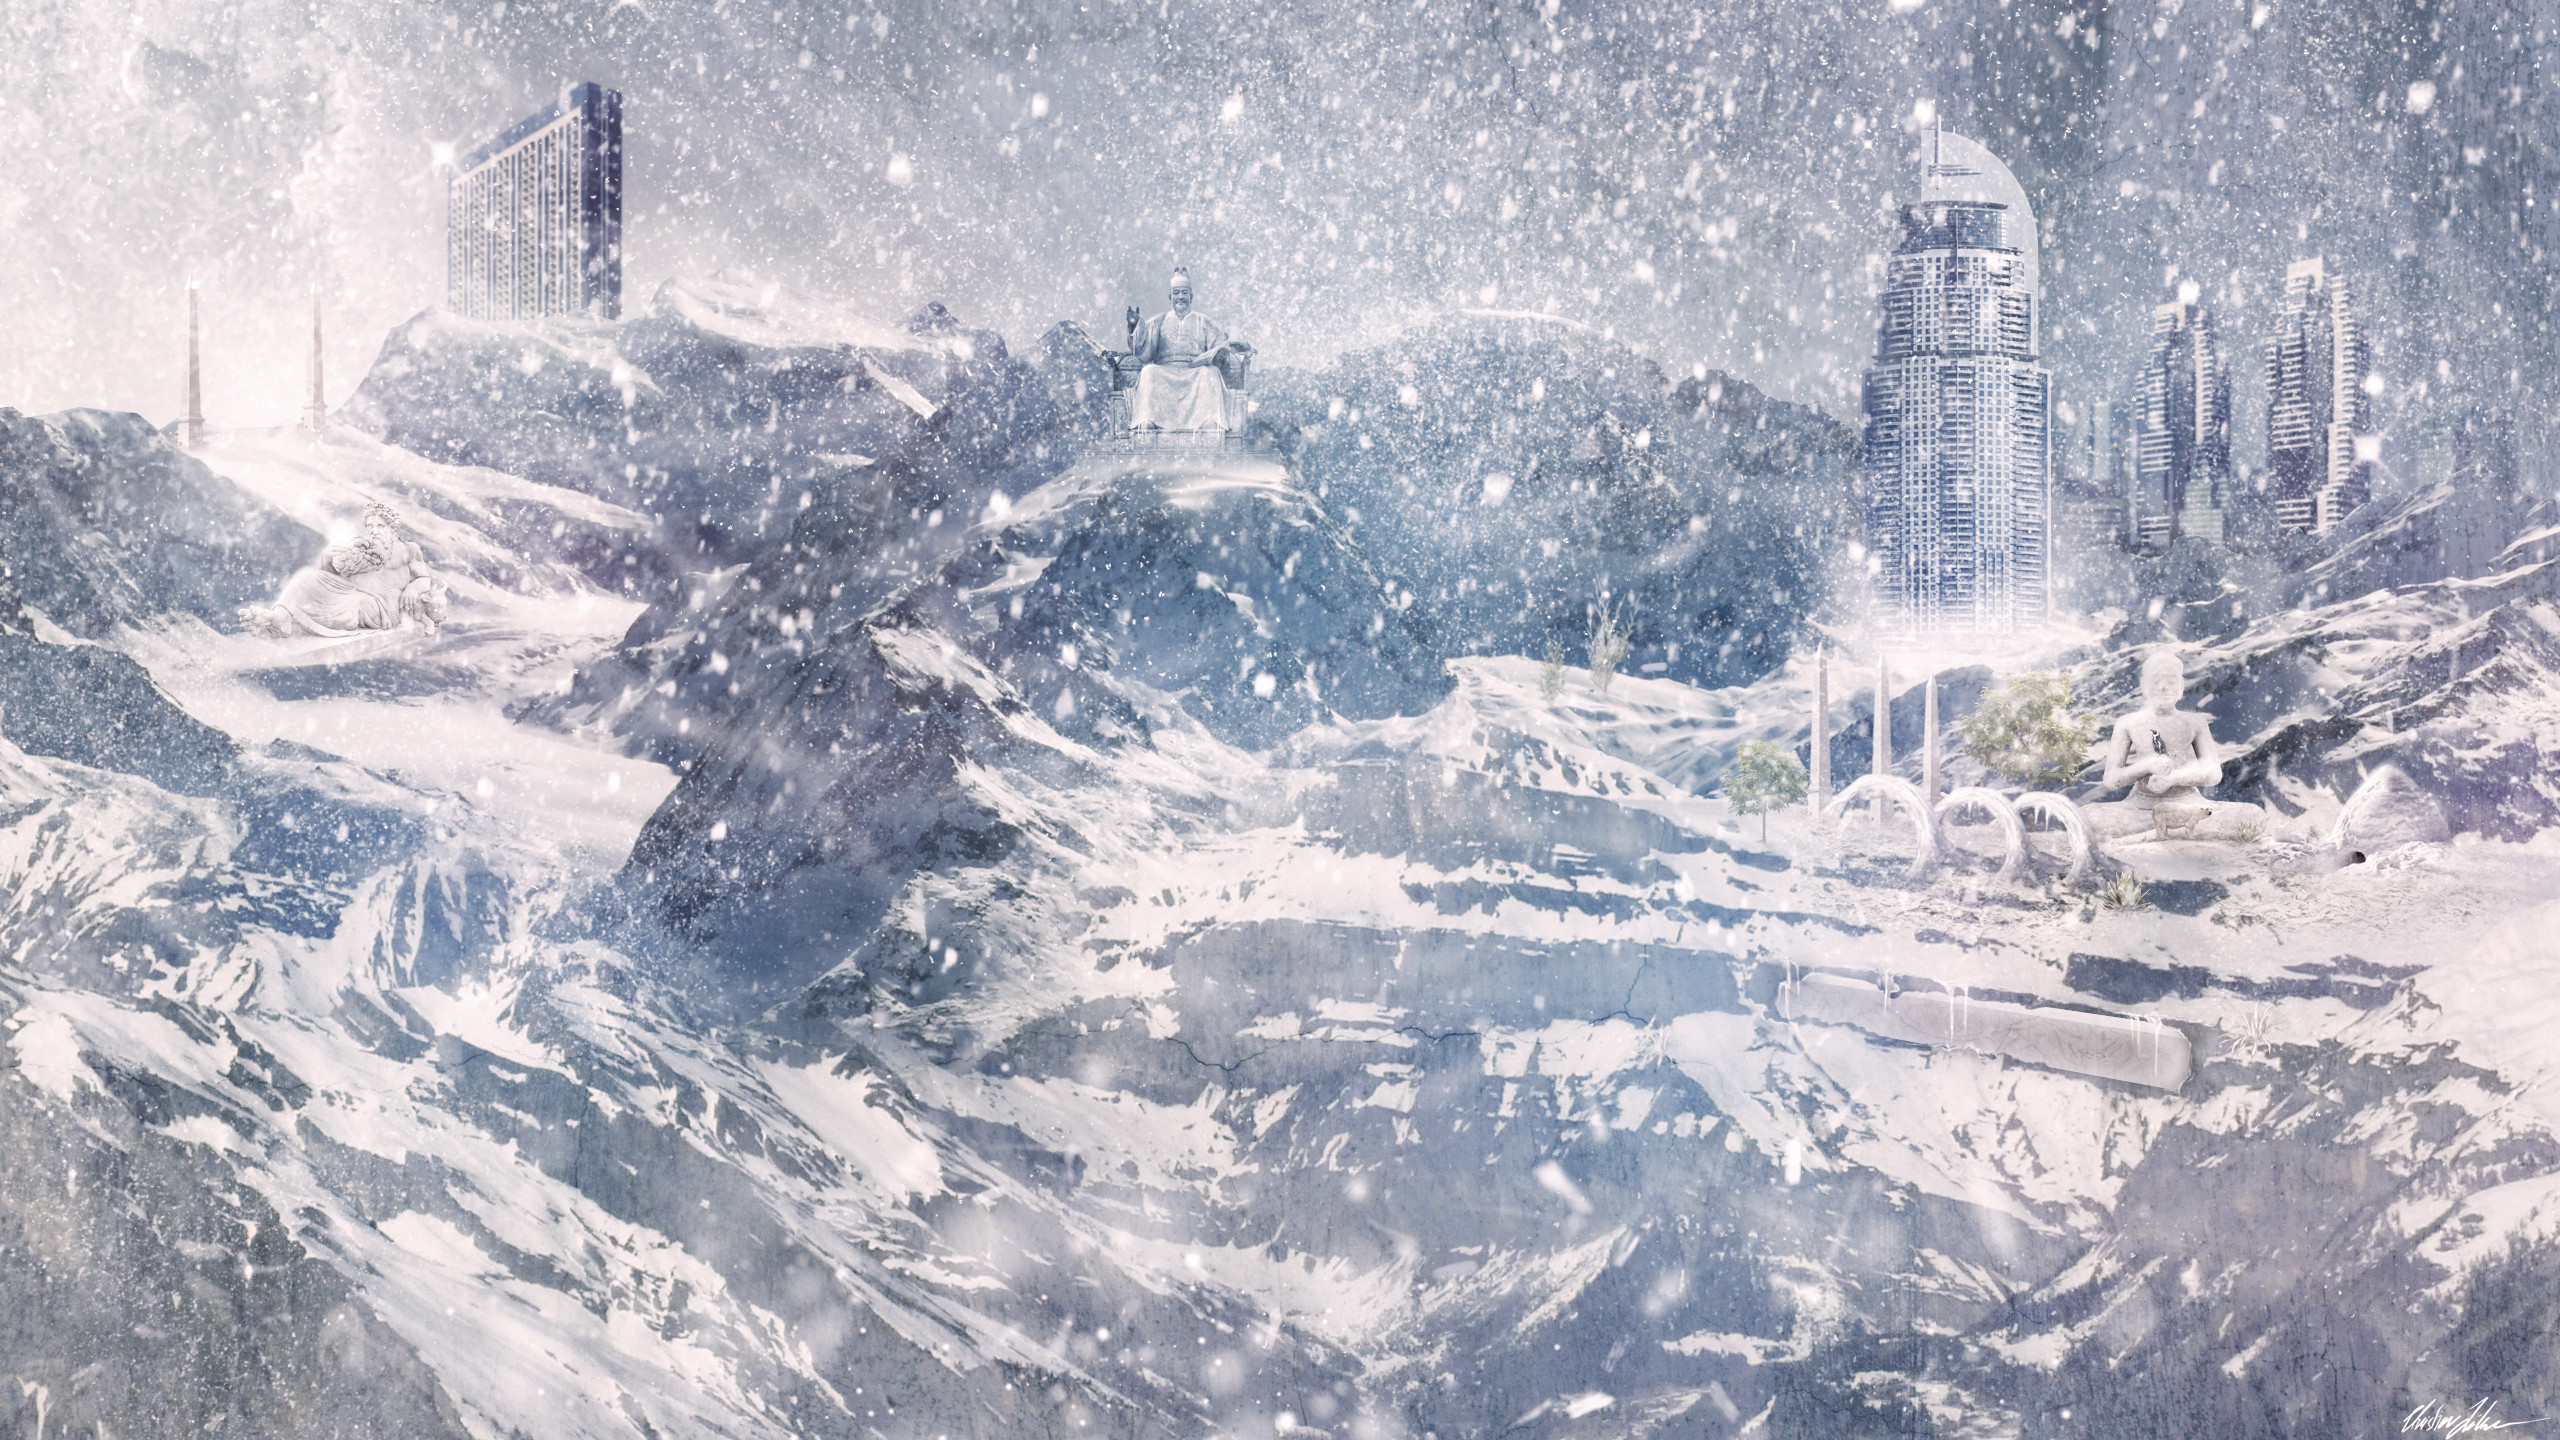 Snow Storm Wallpaper (the best image in 2018)